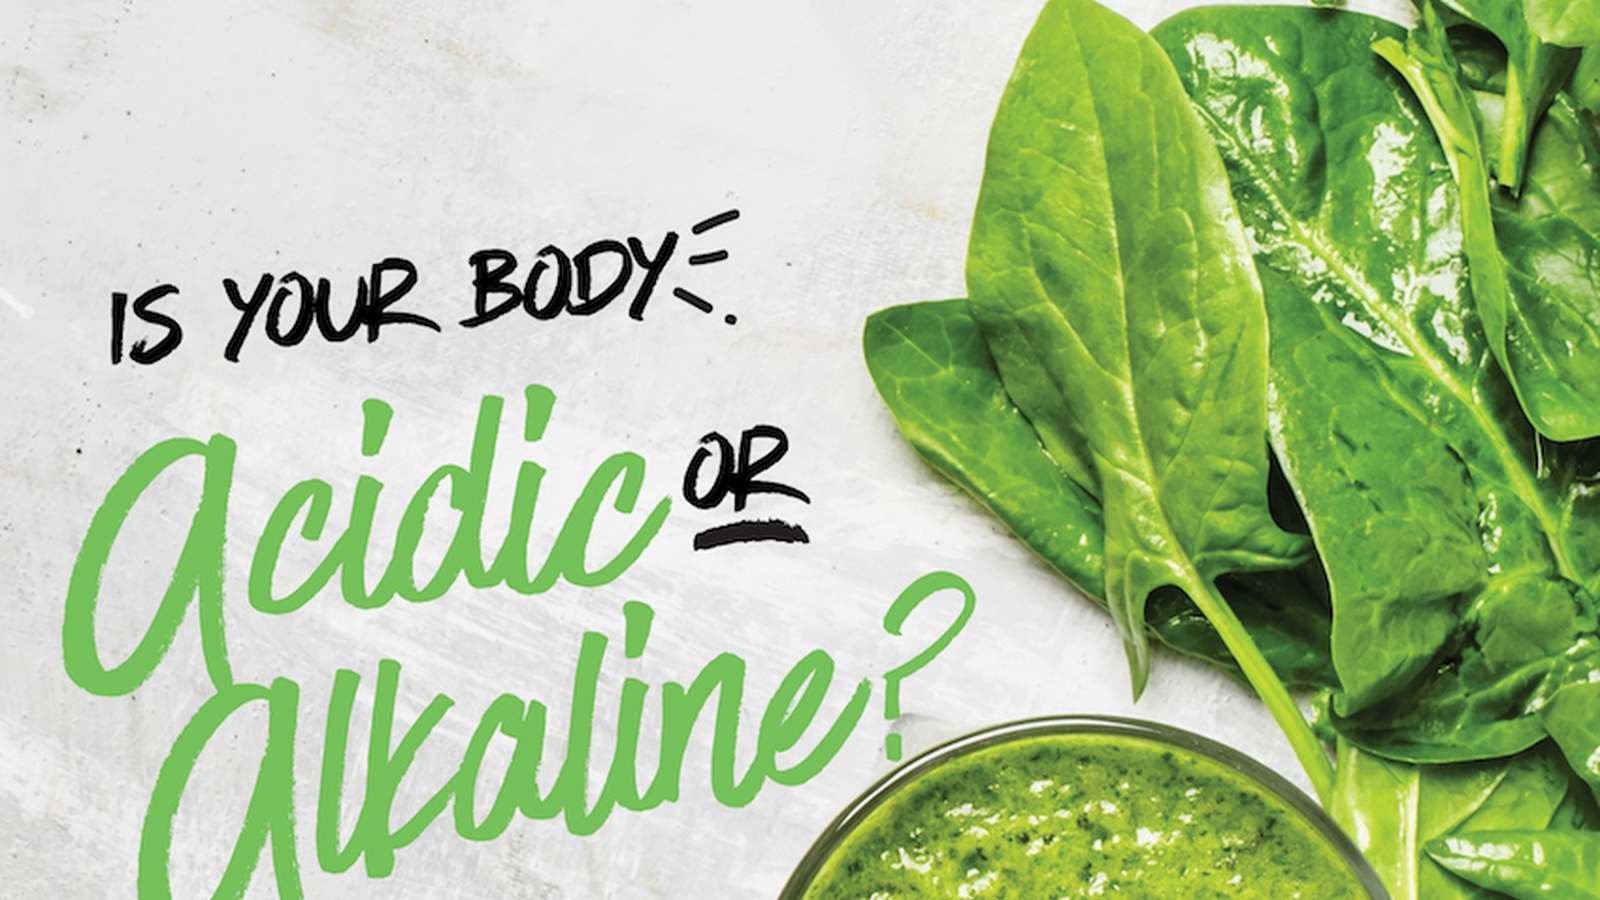 Is Your Body Acidic Or Alkaline? Take This Quiz!